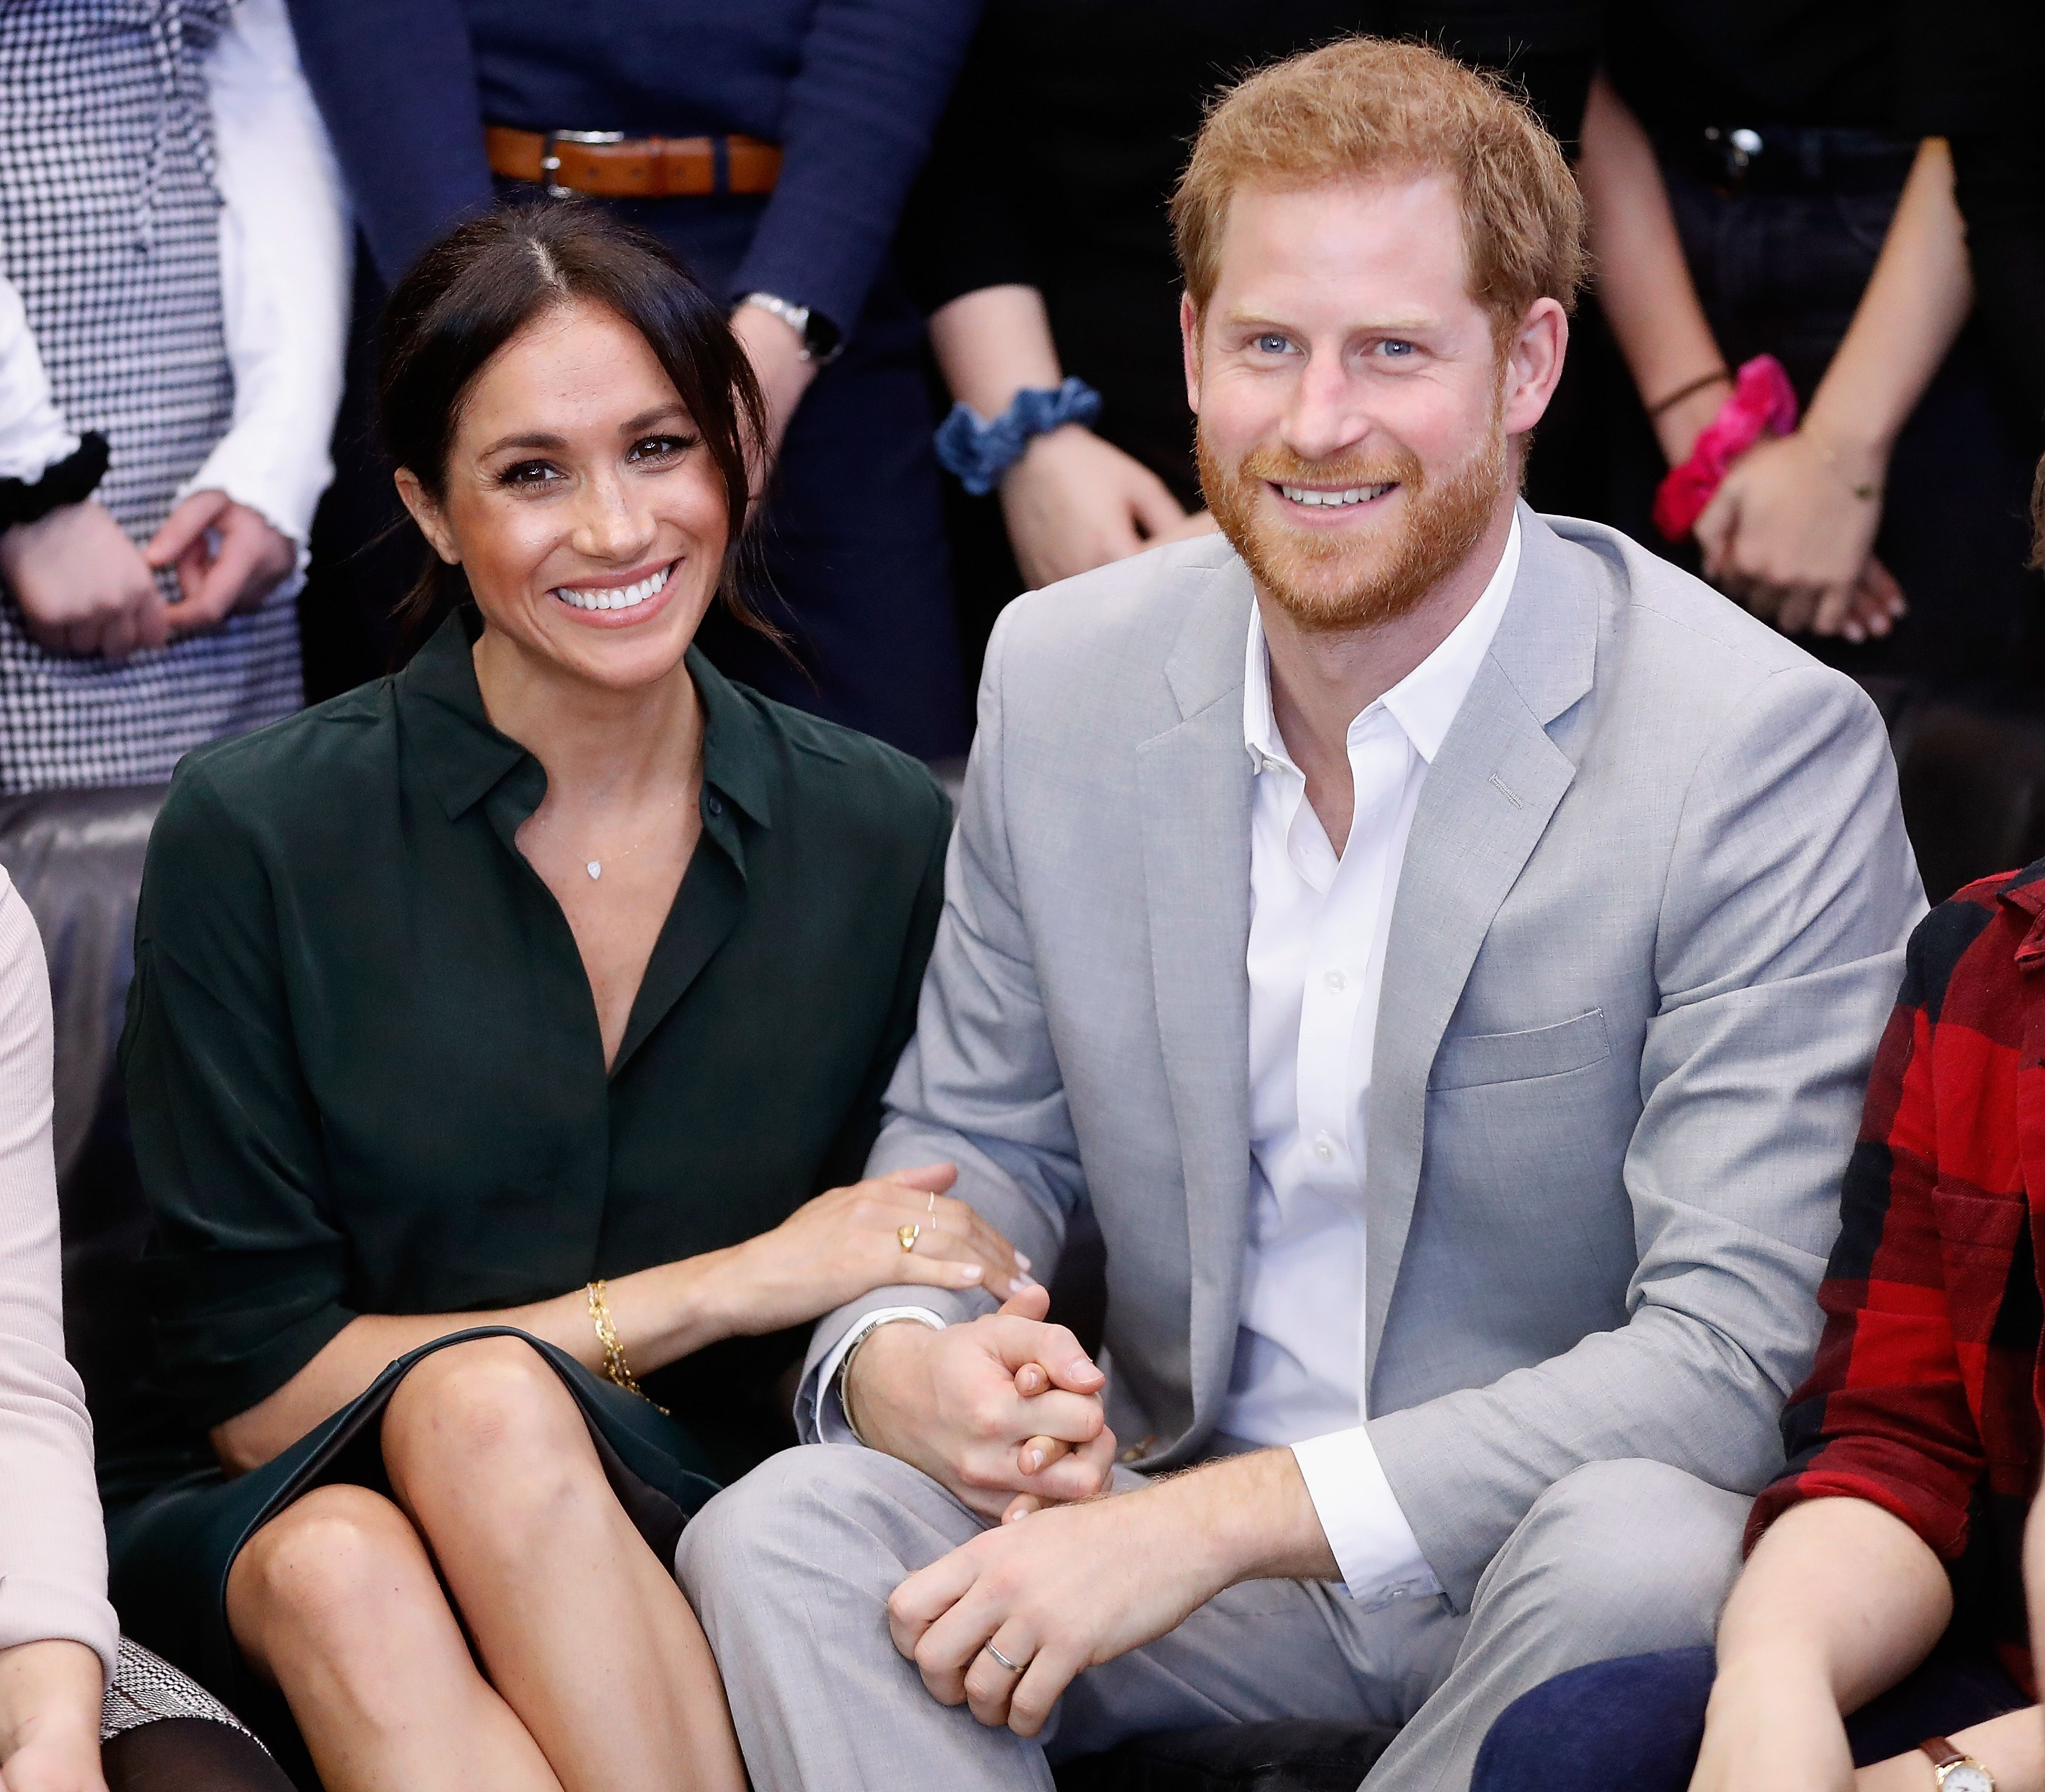 Meghan Markle and Prince Harry make an official visit to the Joff Youth Centre in Peacehaven, Sussex on October 3, 2018 in Peacehaven, United Kingdom | Photo: Getty Images 